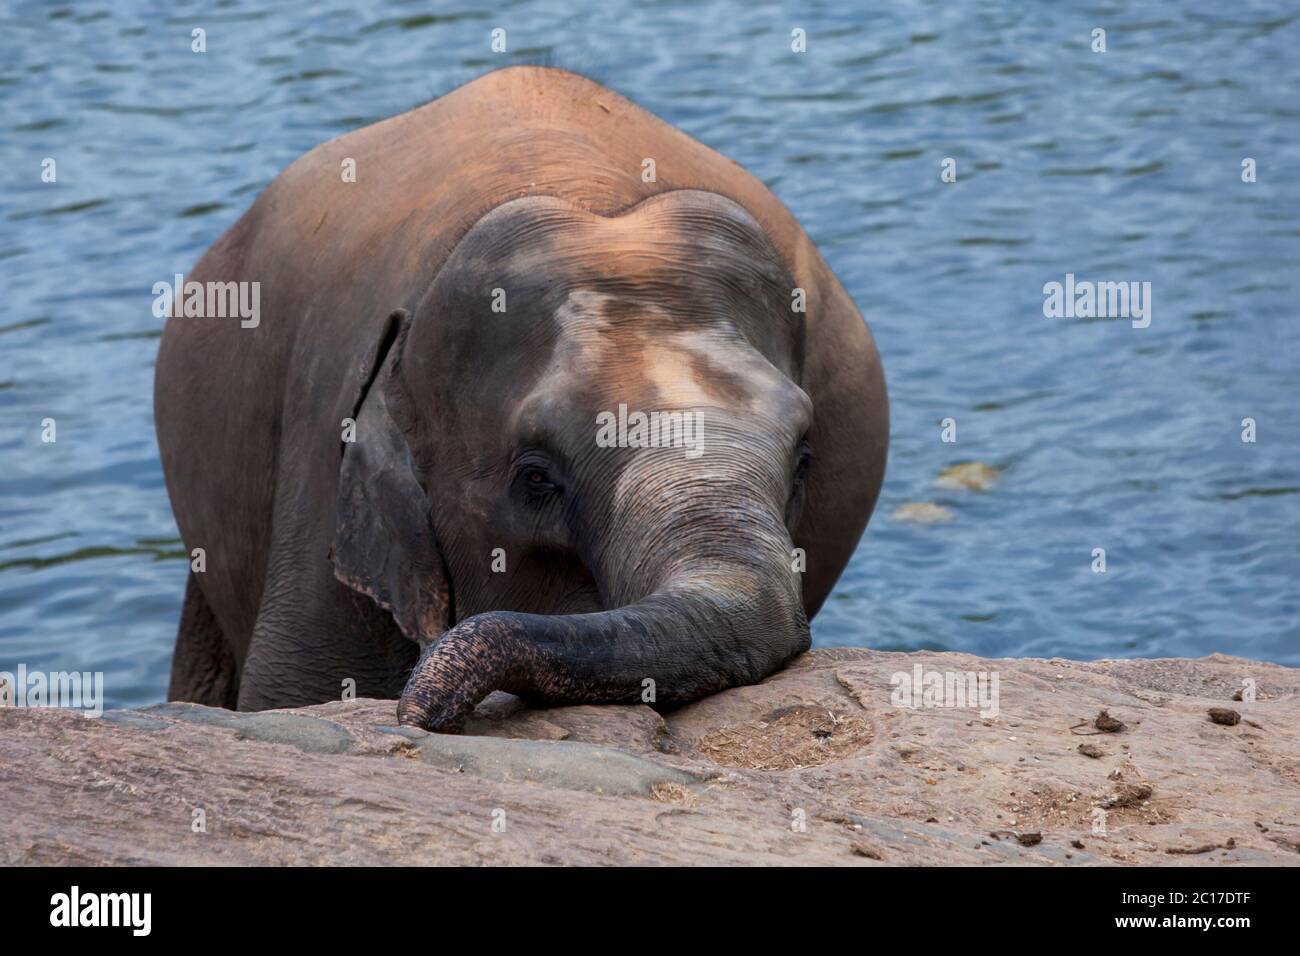 A young elephant from the Pinnawala Elephant Orphanage relaxes on the bank of the Maha Oya River at Pinnawala in Sri Lanka. Stock Photo